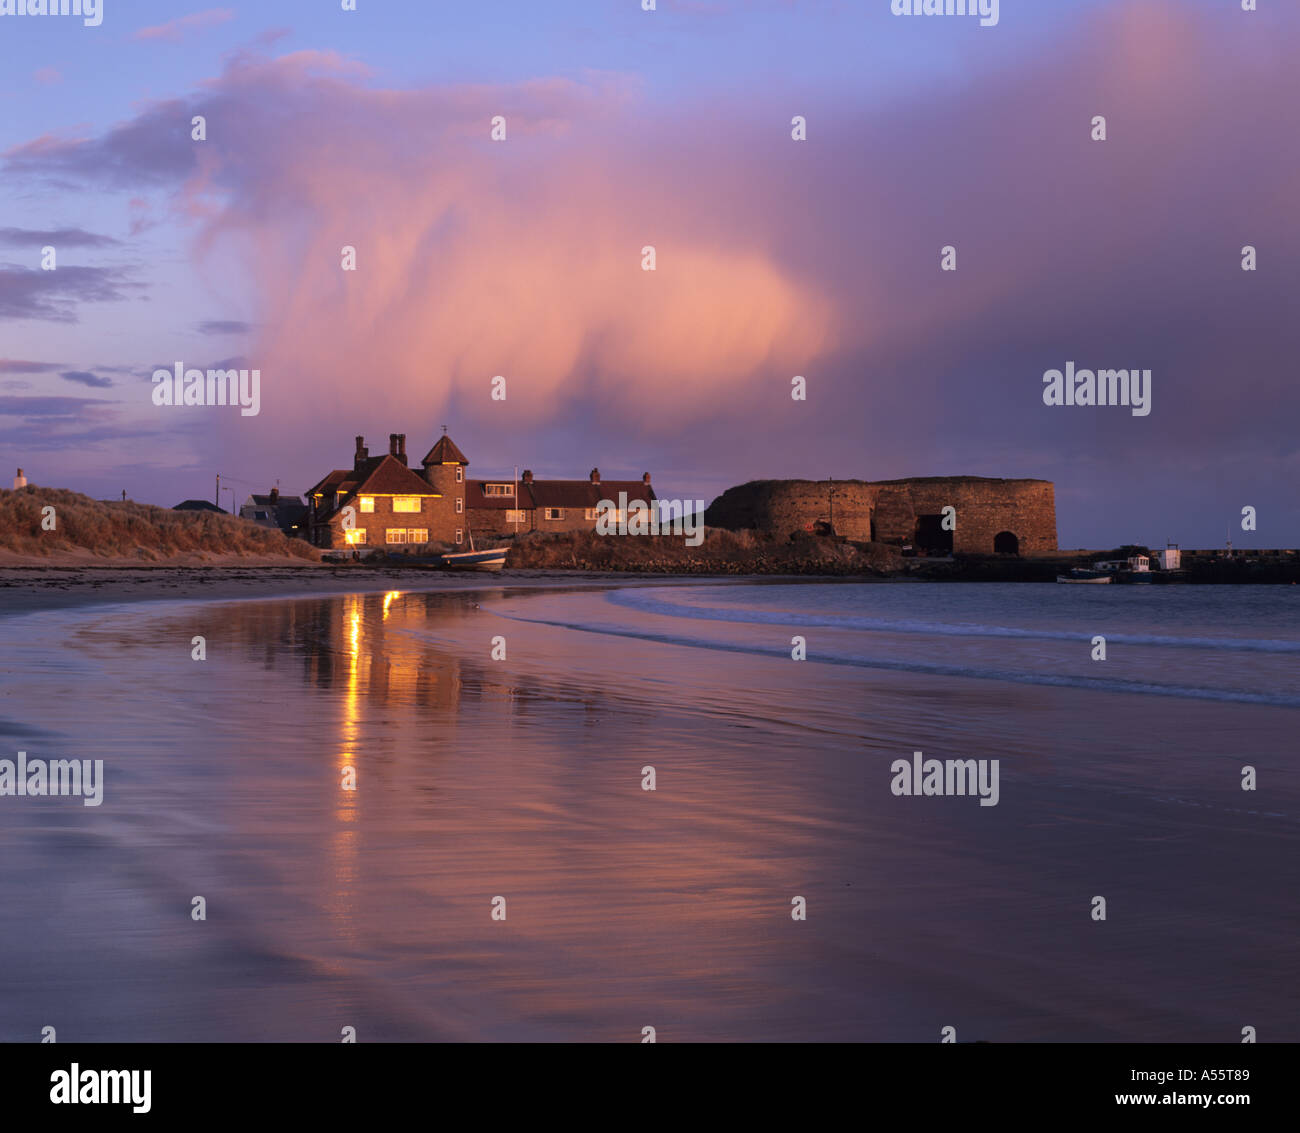 The village of Beadnell on the Northumberland coast of England Stock Photo